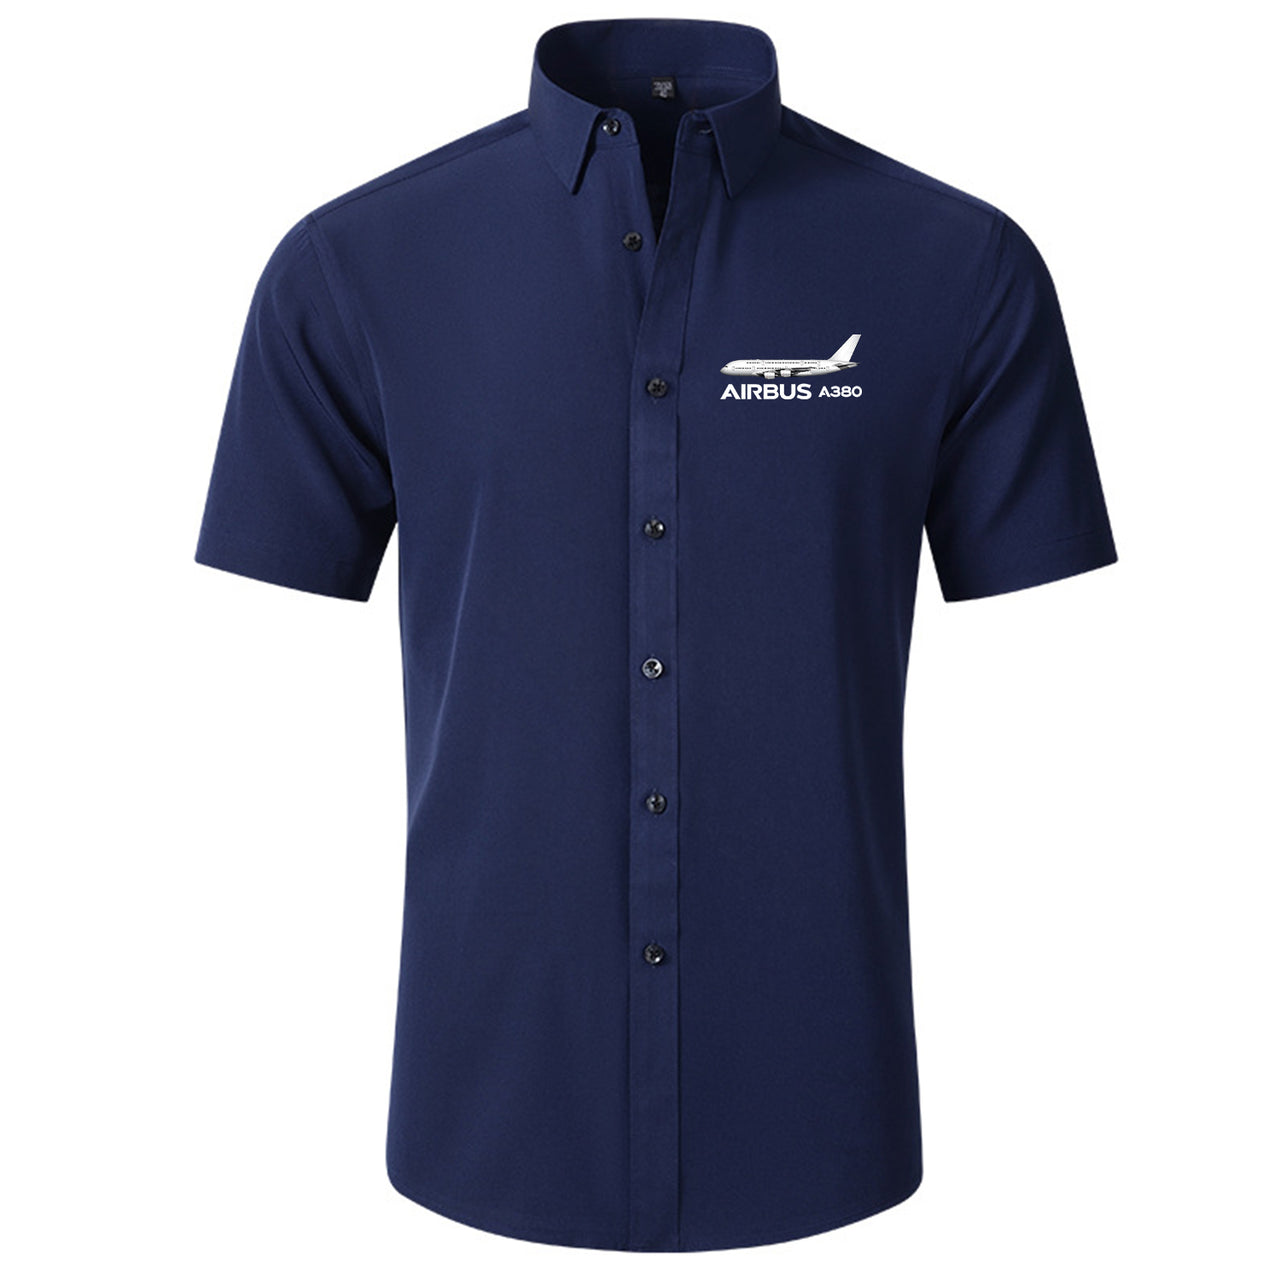 The Airbus A380 Designed Short Sleeve Shirts